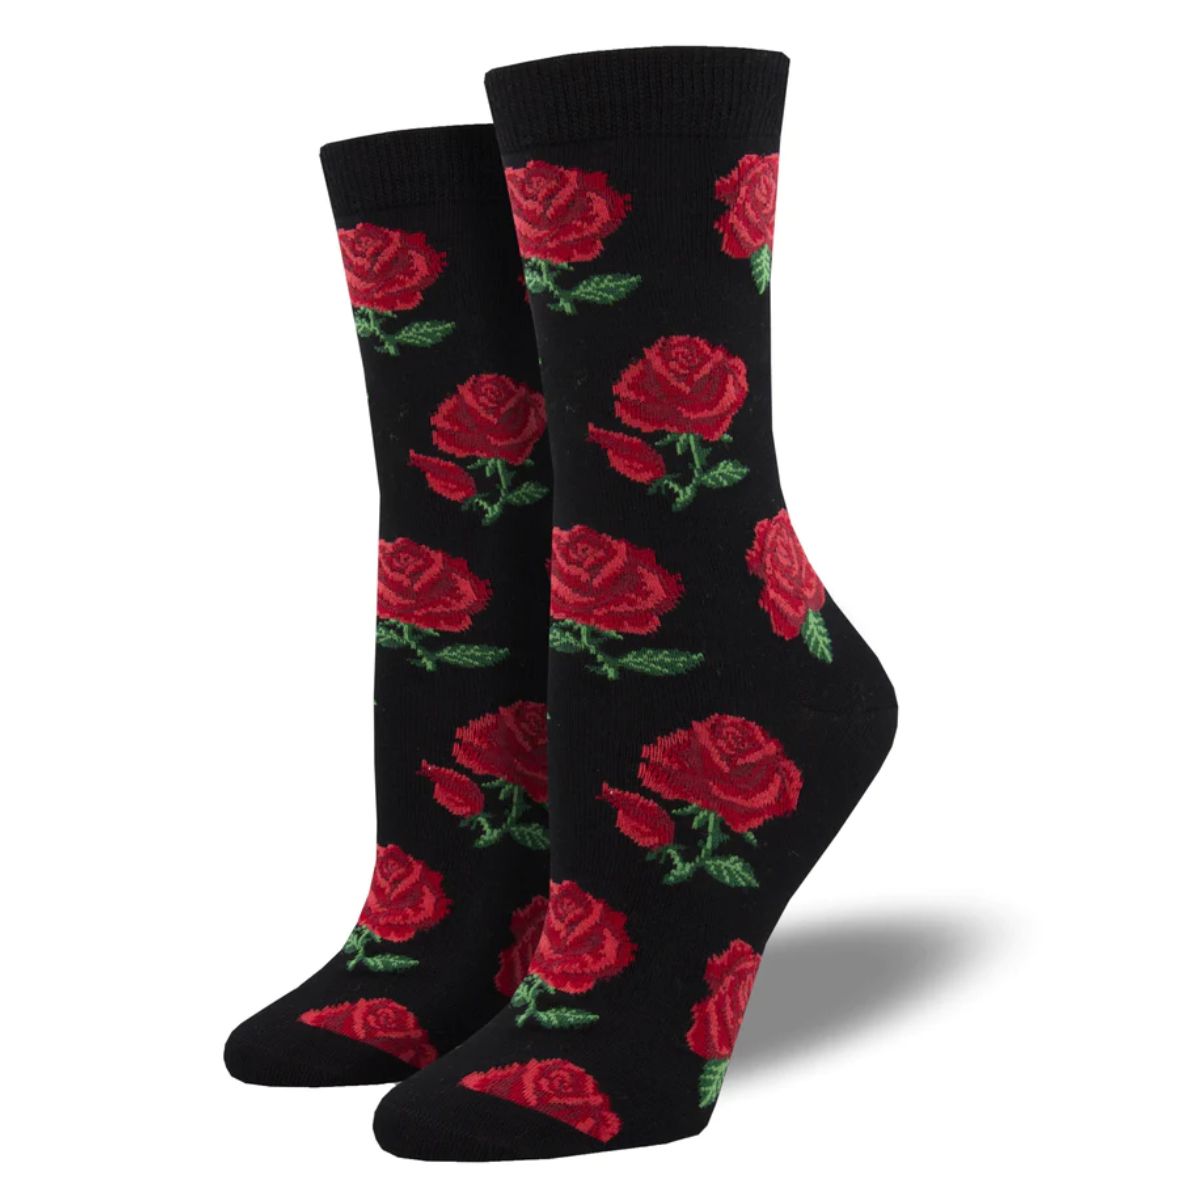 Rosy toes socks a pair of black crew socks with rose print